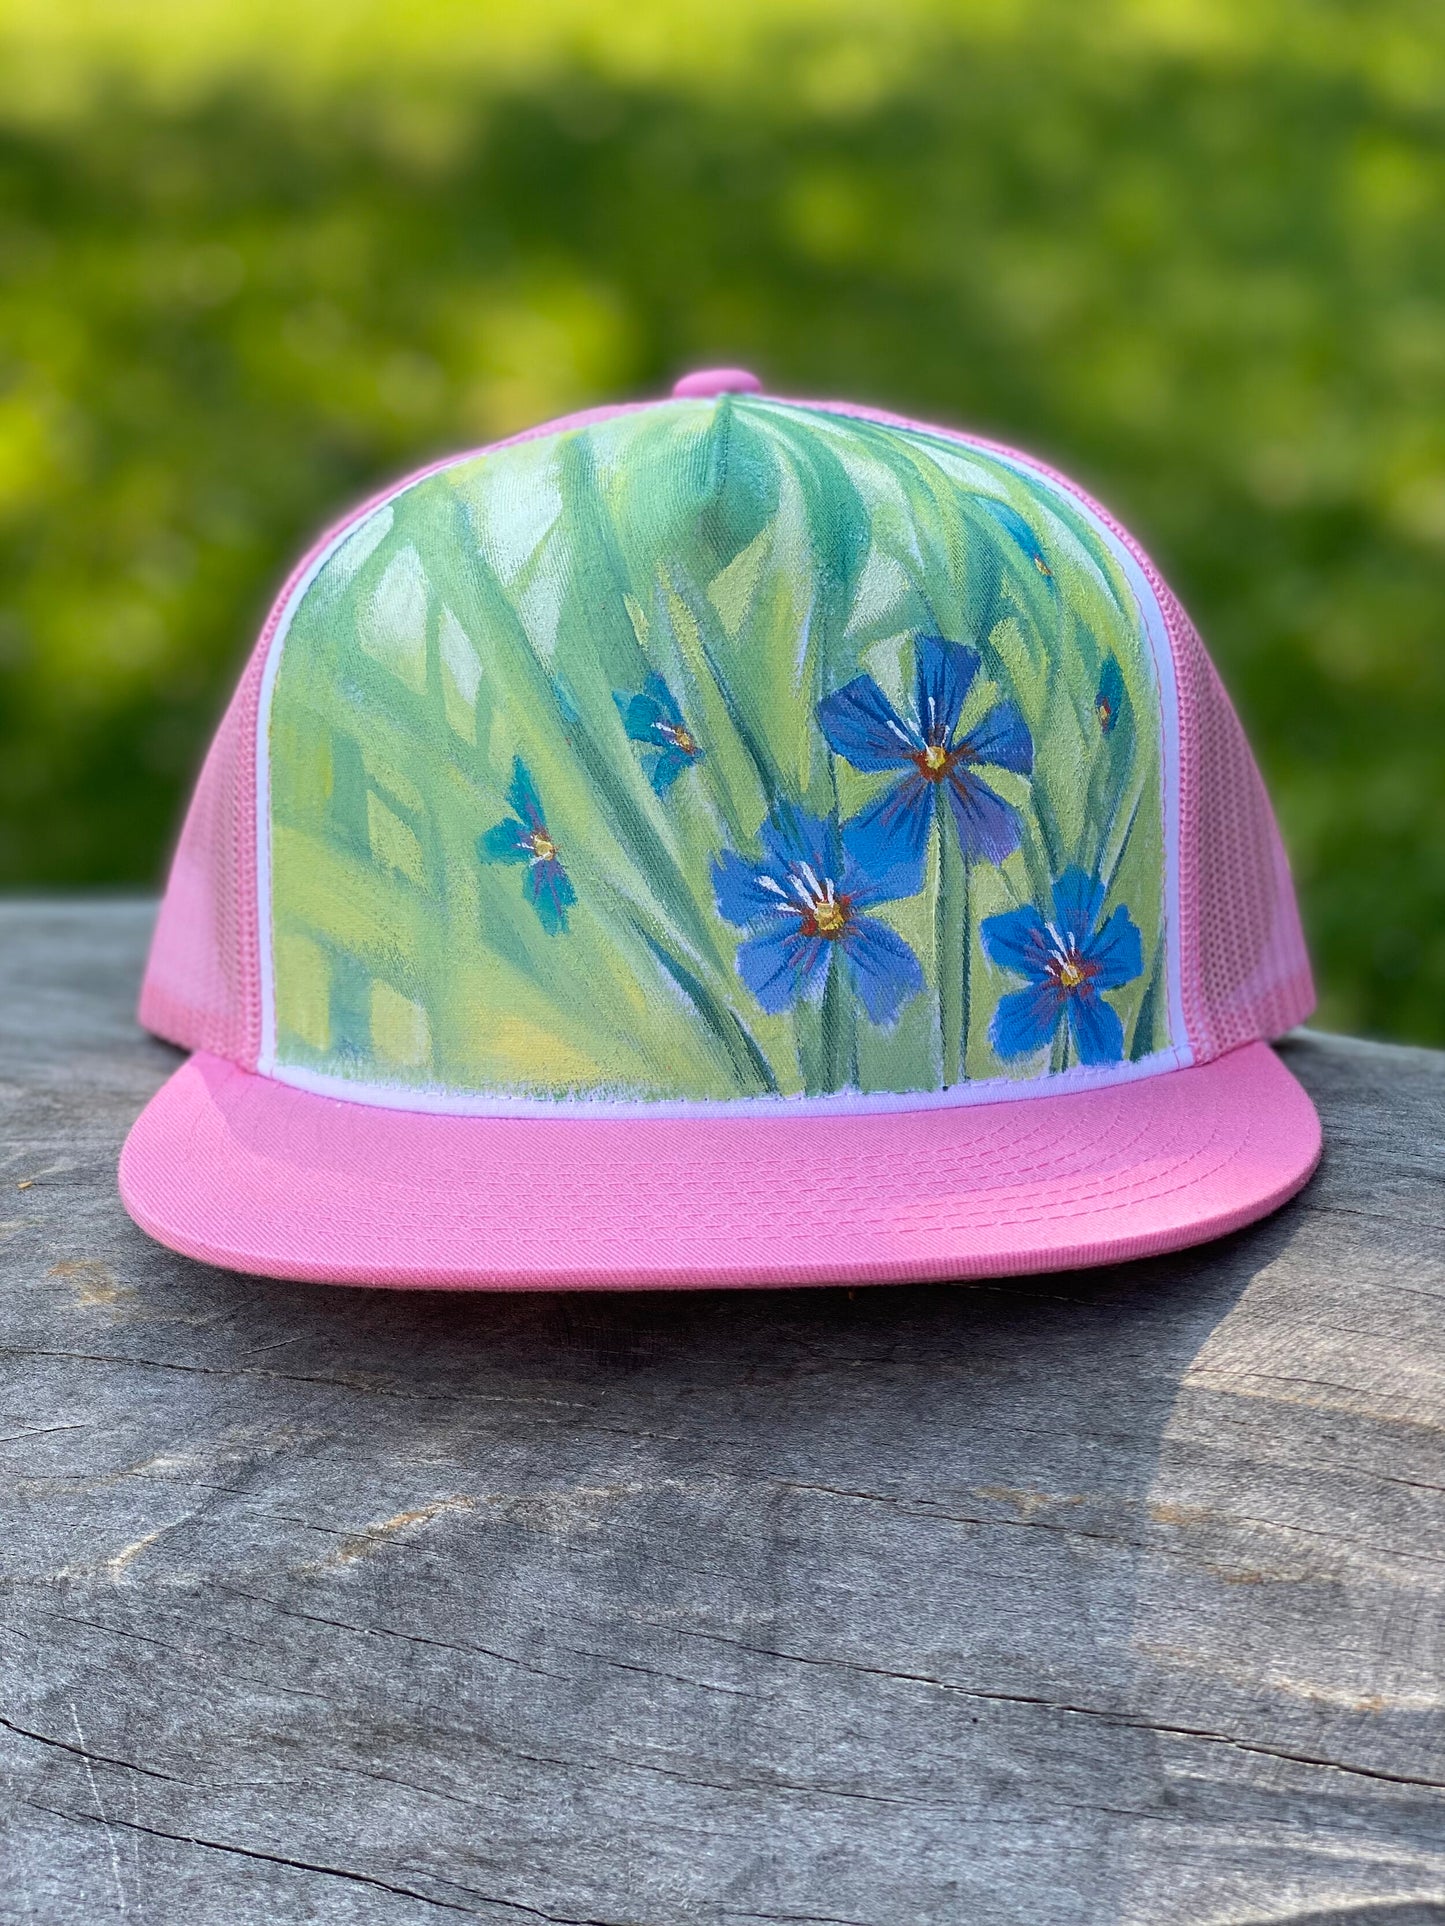 "Little Beauties" Hand Painted Hat